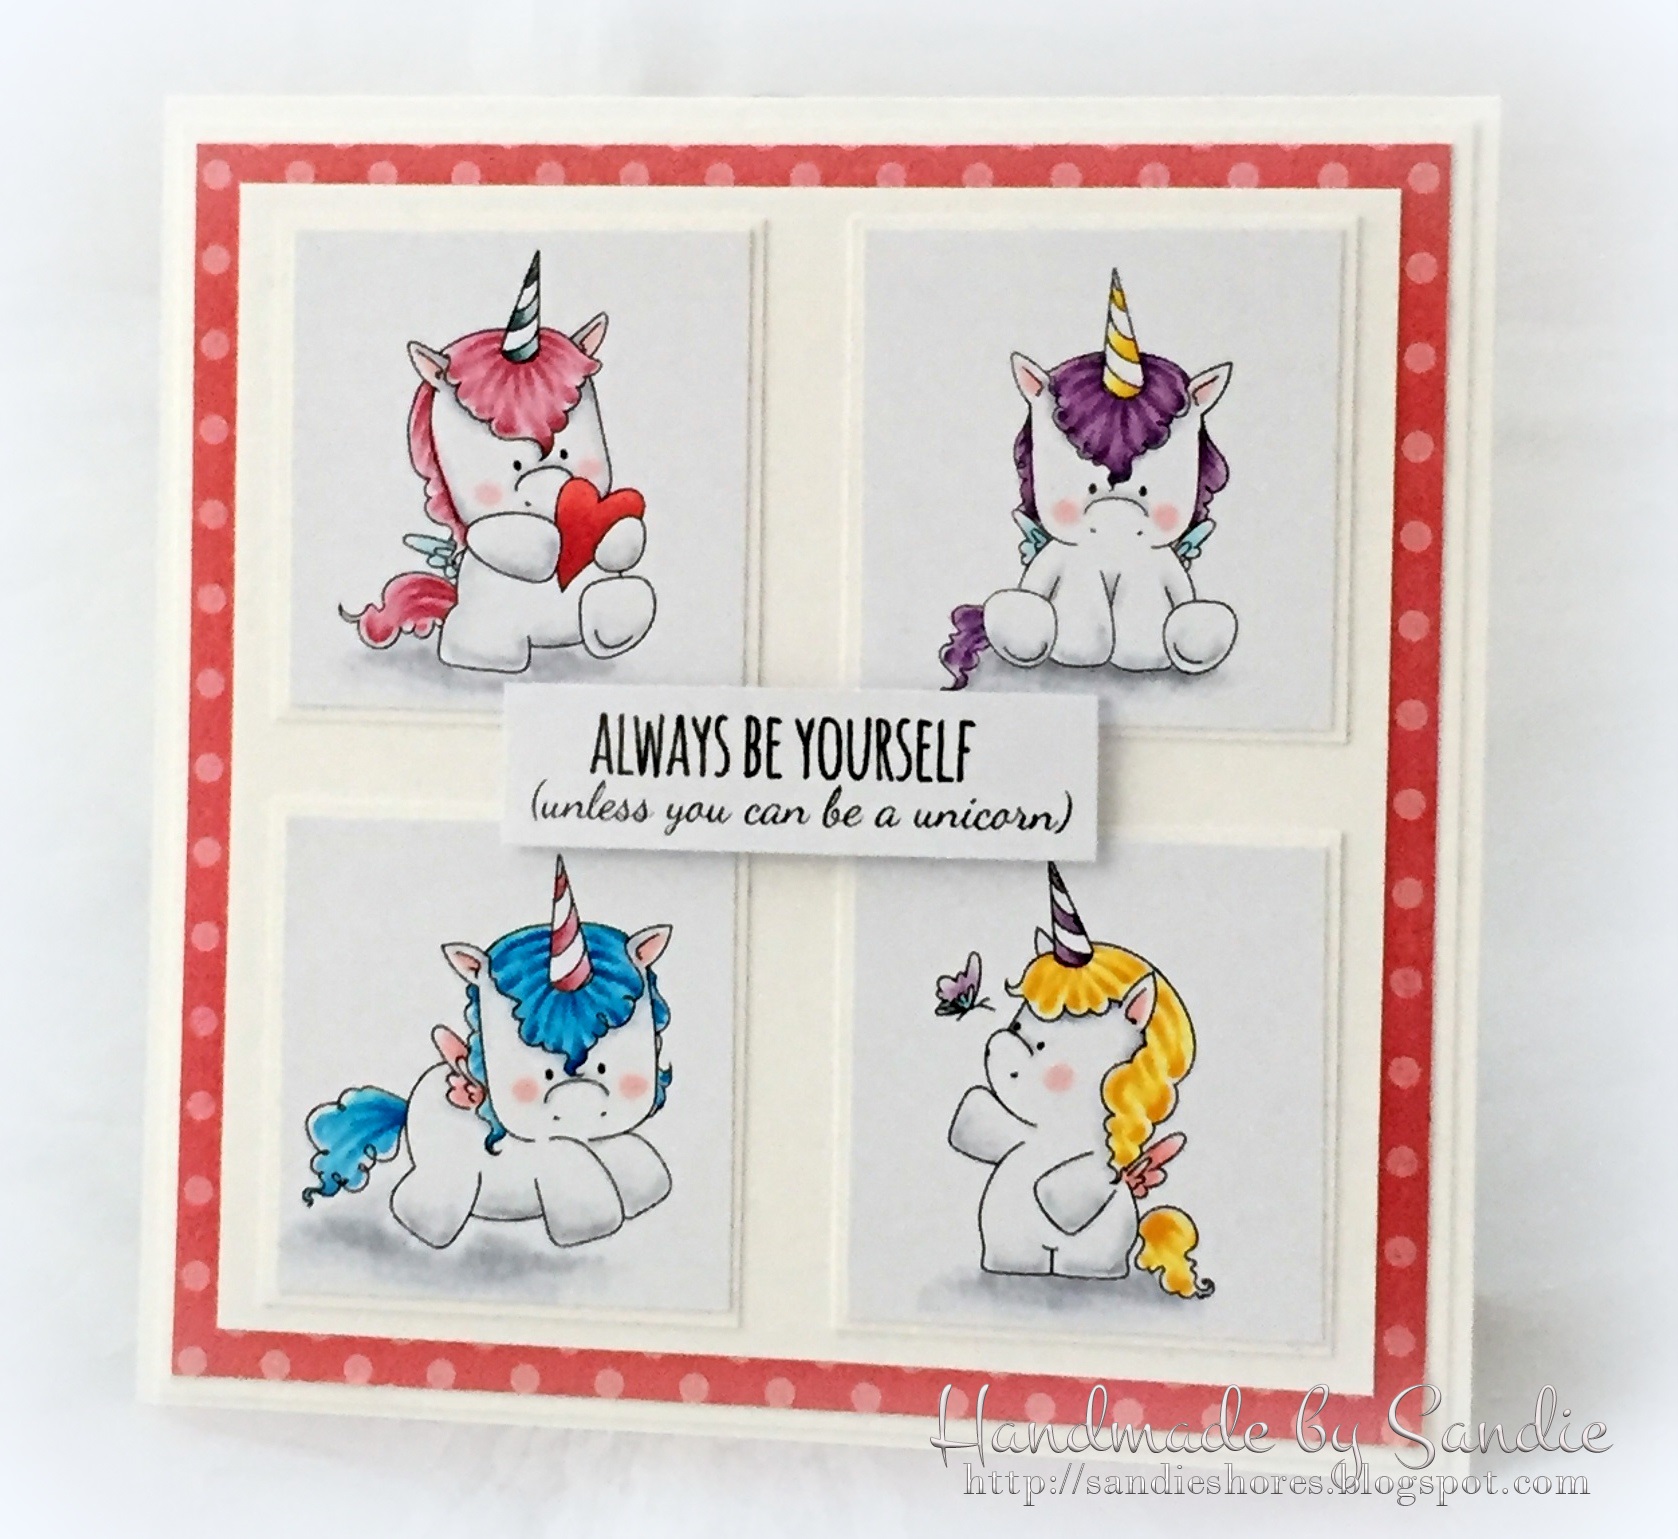 Stamping Bella JANUARY 2017 rubber stamp release-SET OF UNICORNS card by Sandie Dunne